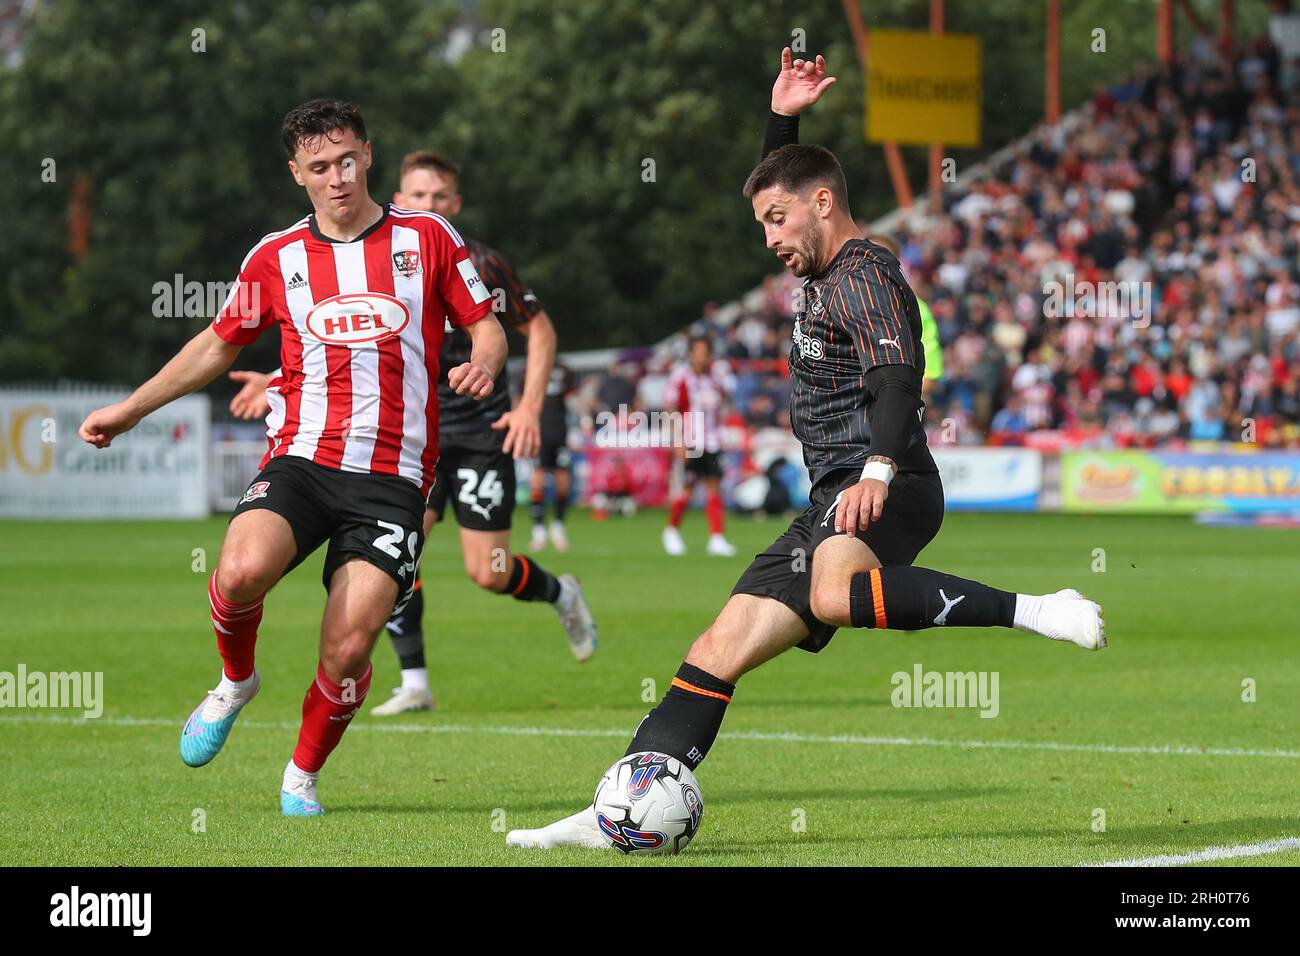 Exeter, UK. 12th Aug, 2023. Owen Dale #7 of Blackpool in action during the Sky Bet League 1 match Exeter City vs Blackpool at St James' Park, Exeter, United Kingdom, 12th August 2023 (Photo by Gareth Evans/News Images) in Exeter, United Kingdom on 8/12/2023. (Photo by Gareth Evans/News Images/Sipa USA) Credit: Sipa USA/Alamy Live News Stock Photo